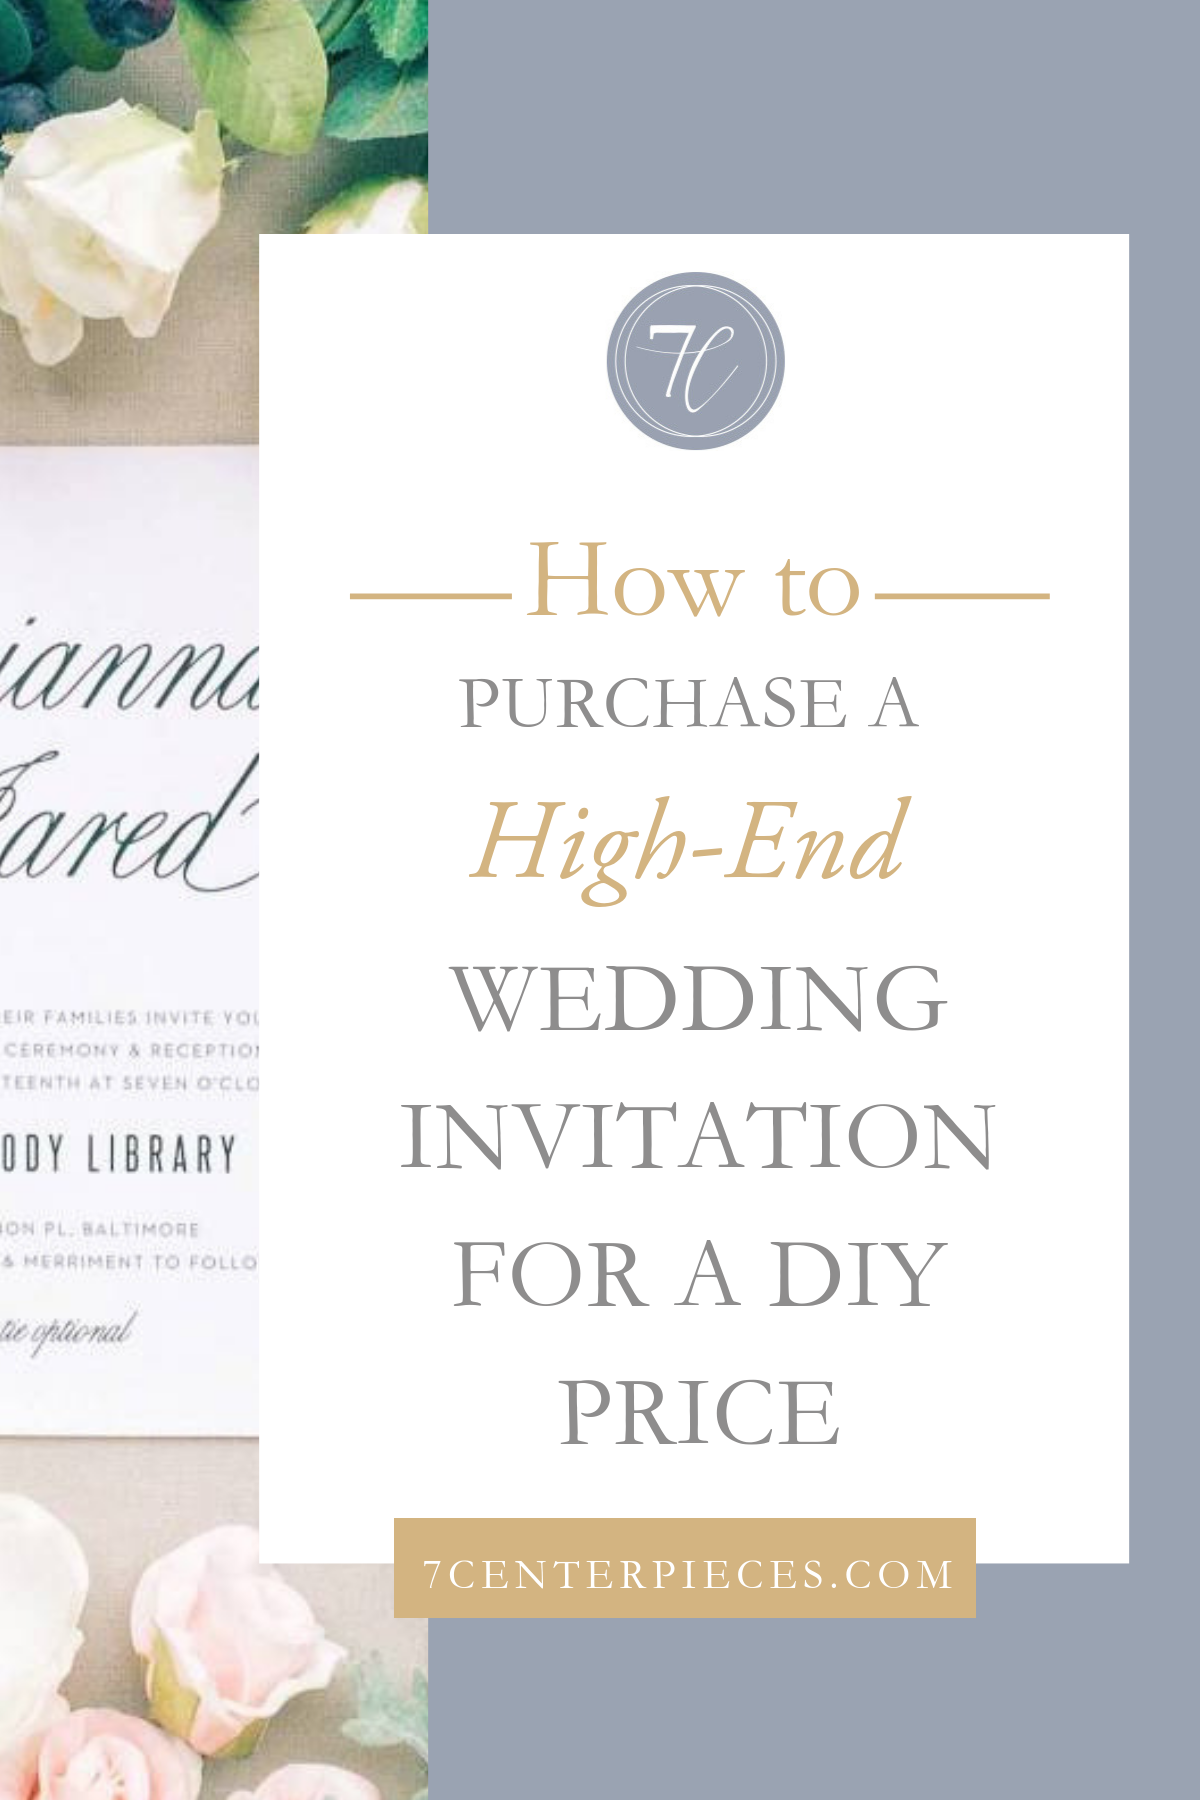 How to Purchase a High-end Wedding Invitation for a DIY Price